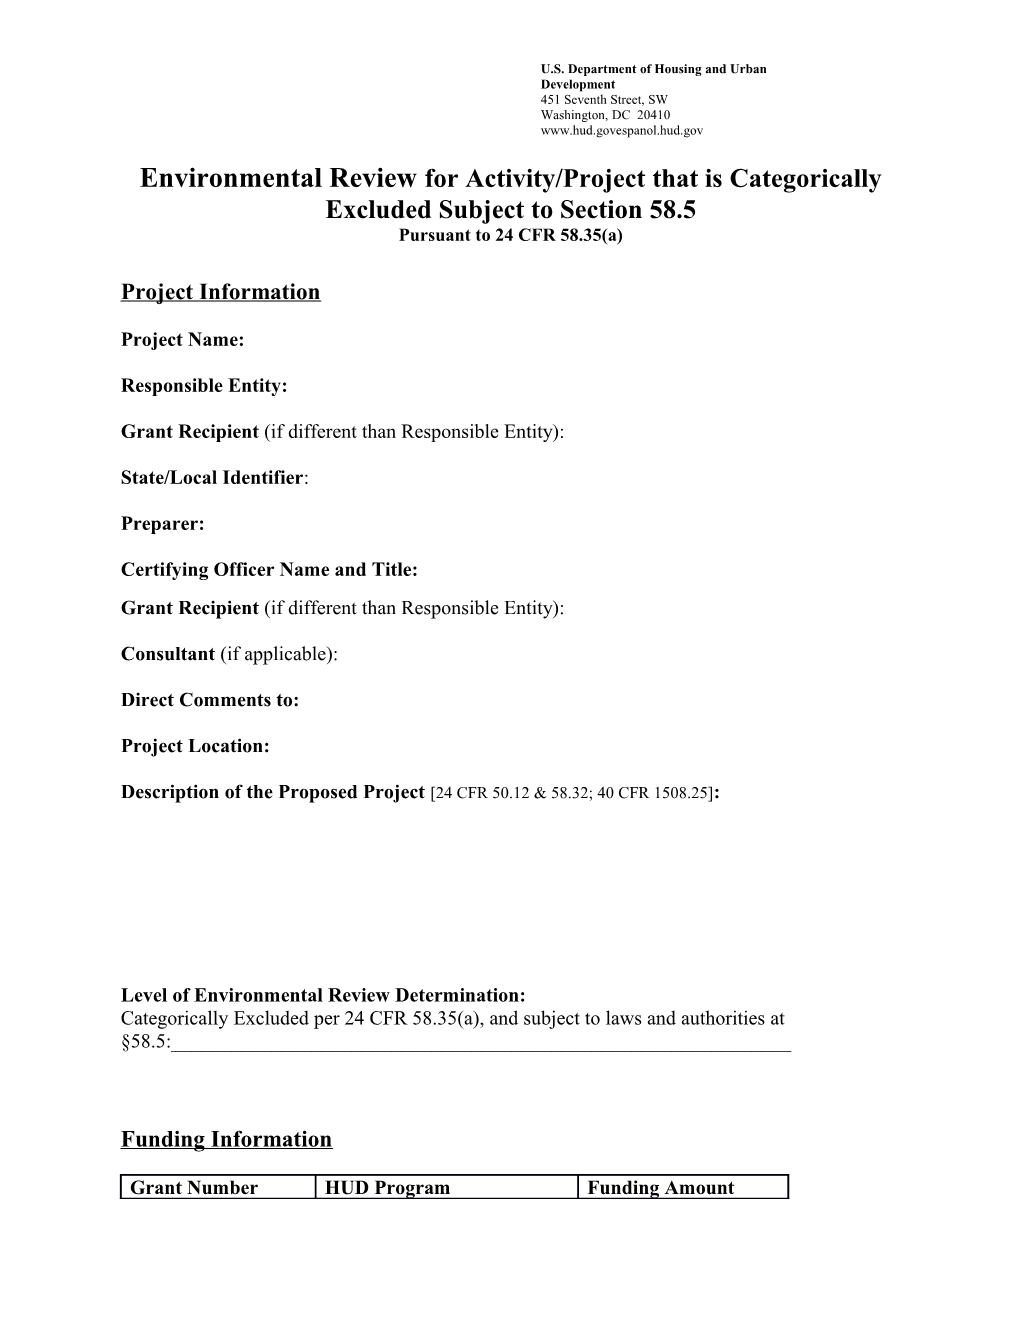 Environmental Review for Activity/Project That Is Categorically Excluded Subject to Section 58